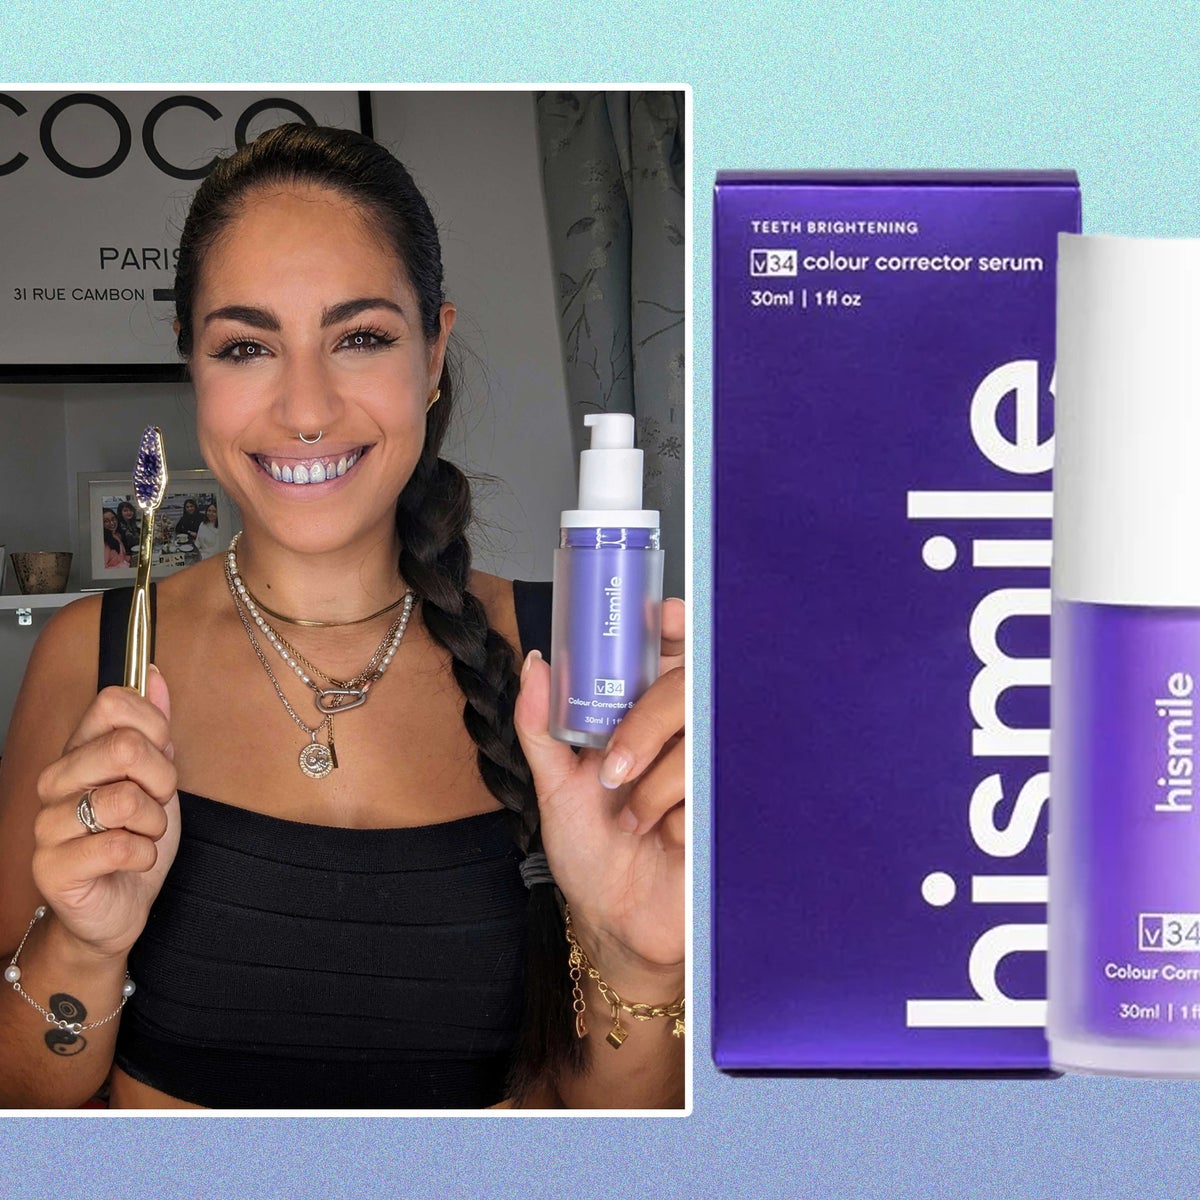 Hismile V34 colour corrector review: Does the purple toothepaste work?